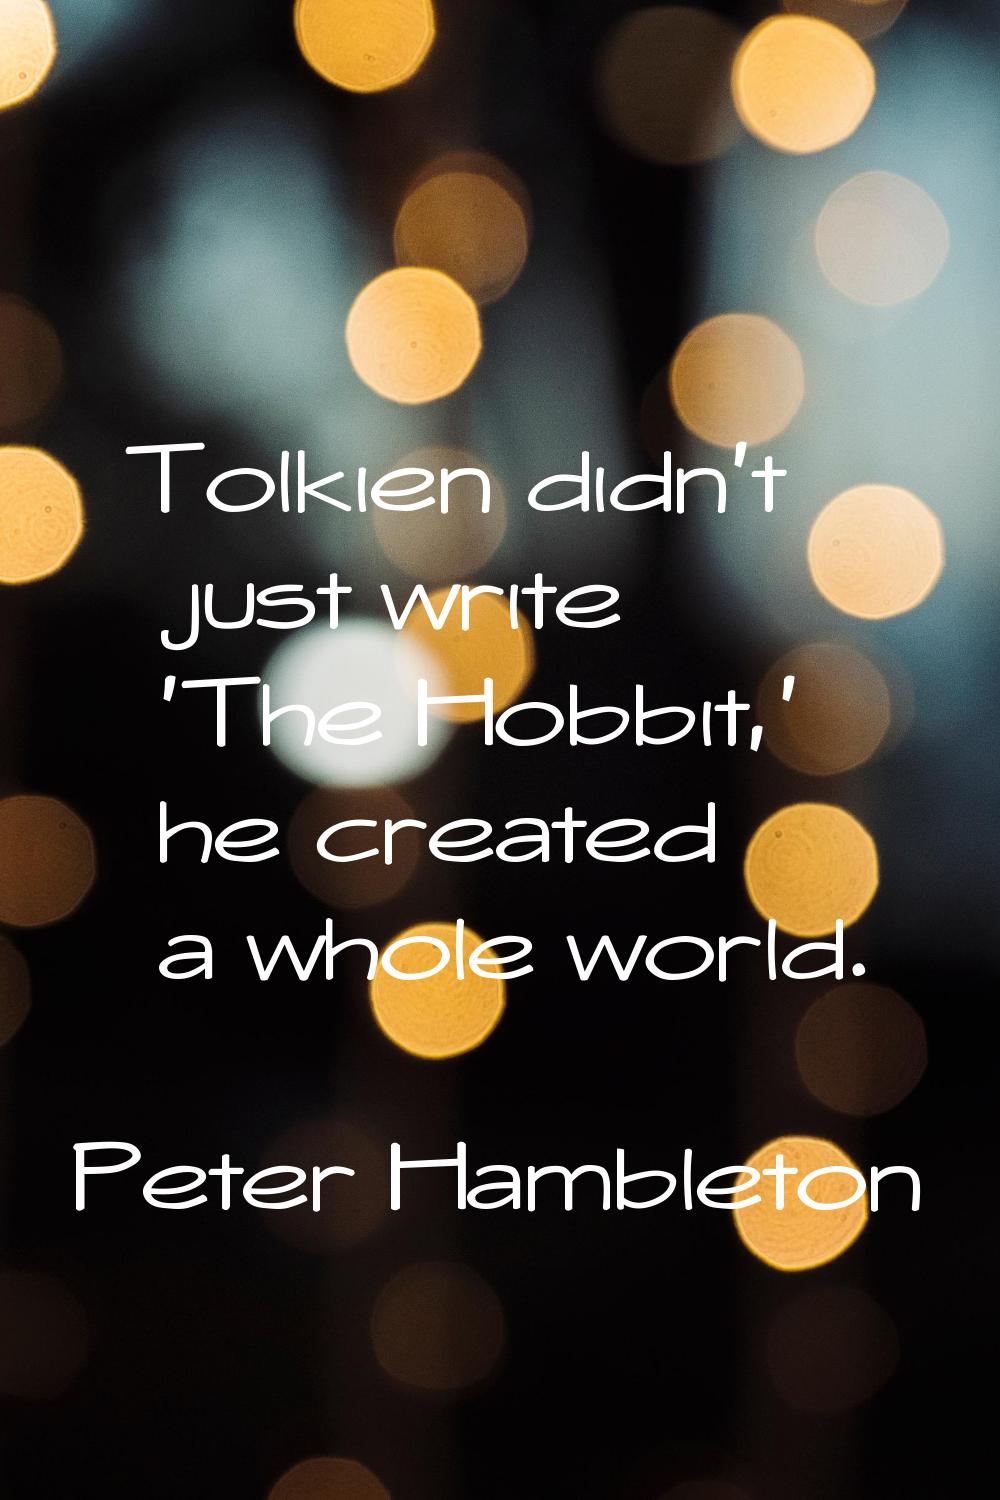 Tolkien didn't just write 'The Hobbit,' he created a whole world.